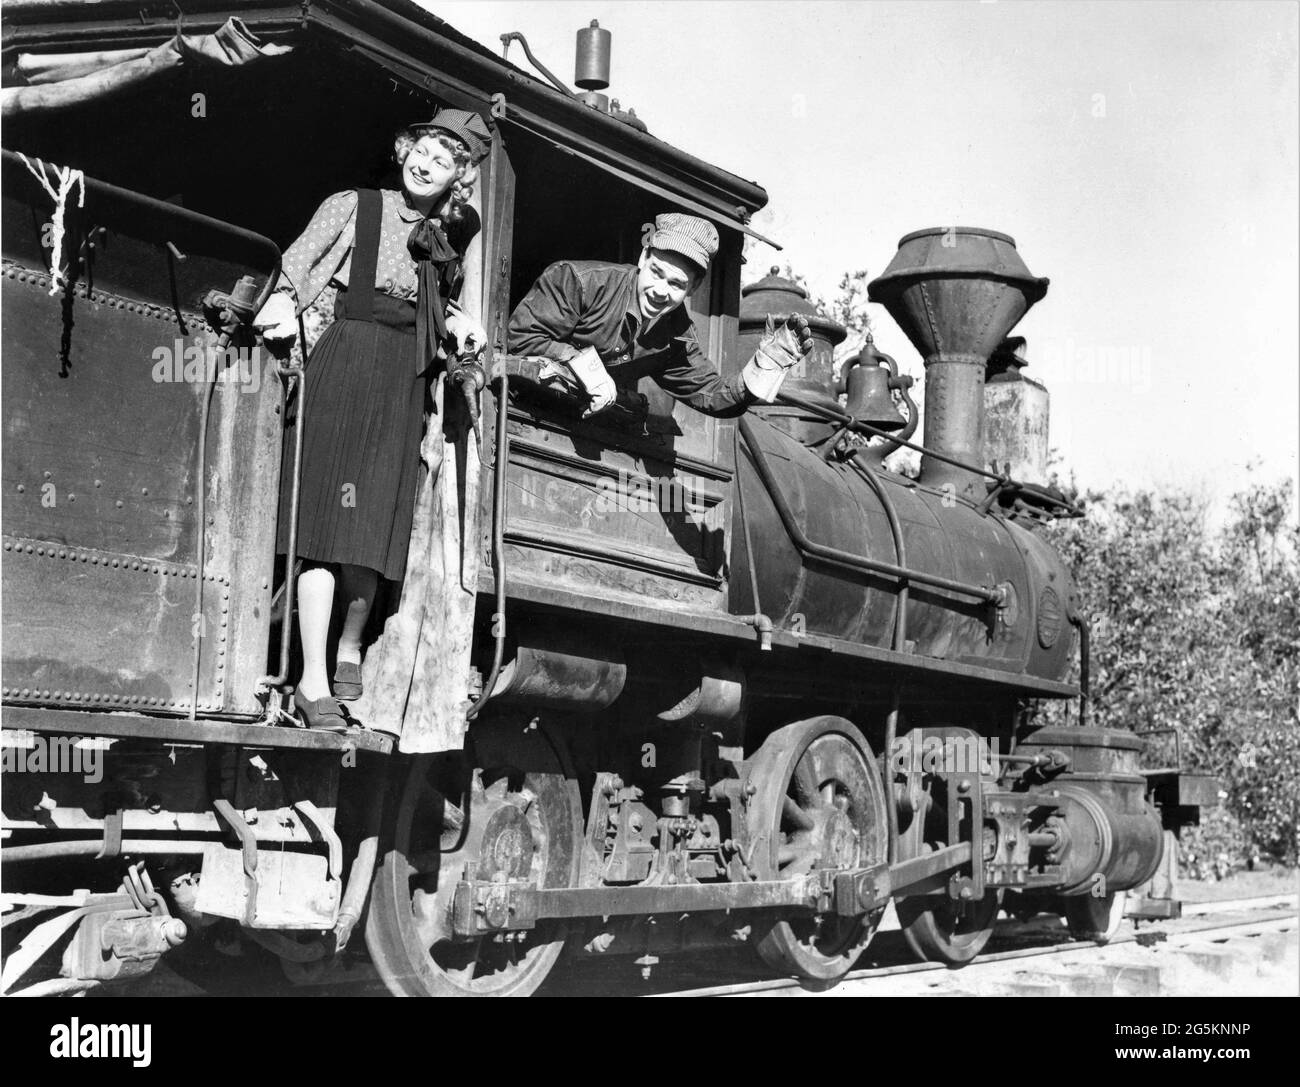 Walt Disney Animator WARD KIMBALL and his wife BETTY in early 1939 riding their private Antique 58 Year Old Steam Locomotive Train on their Private Railroad in San Gabriel California Stock Photo